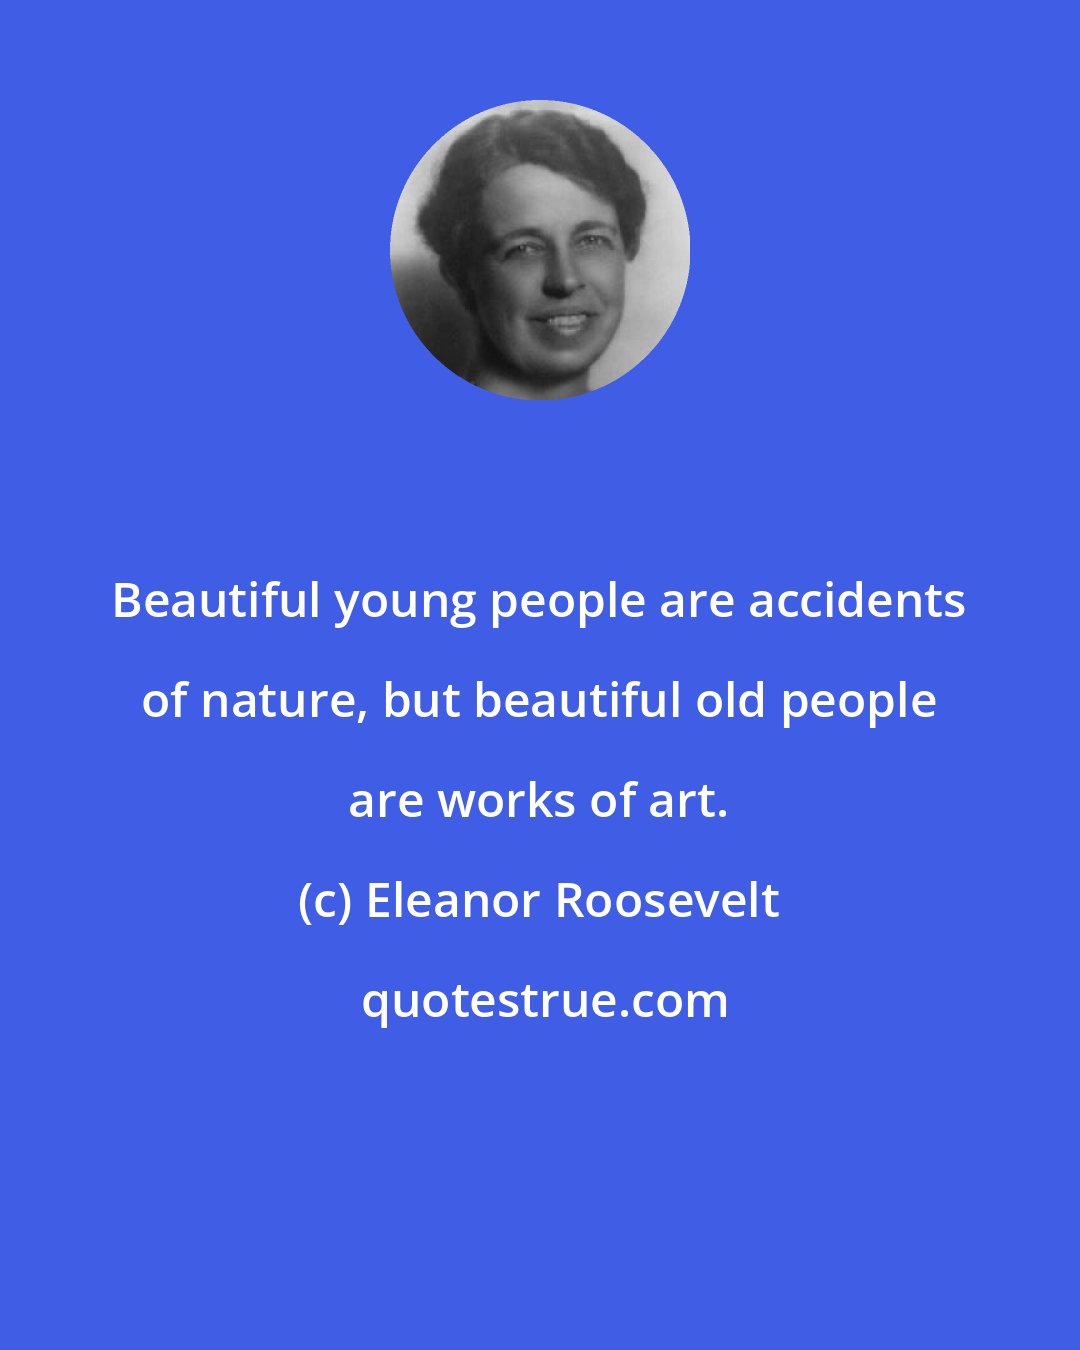 Eleanor Roosevelt: Beautiful young people are accidents of nature, but beautiful old people are works of art.